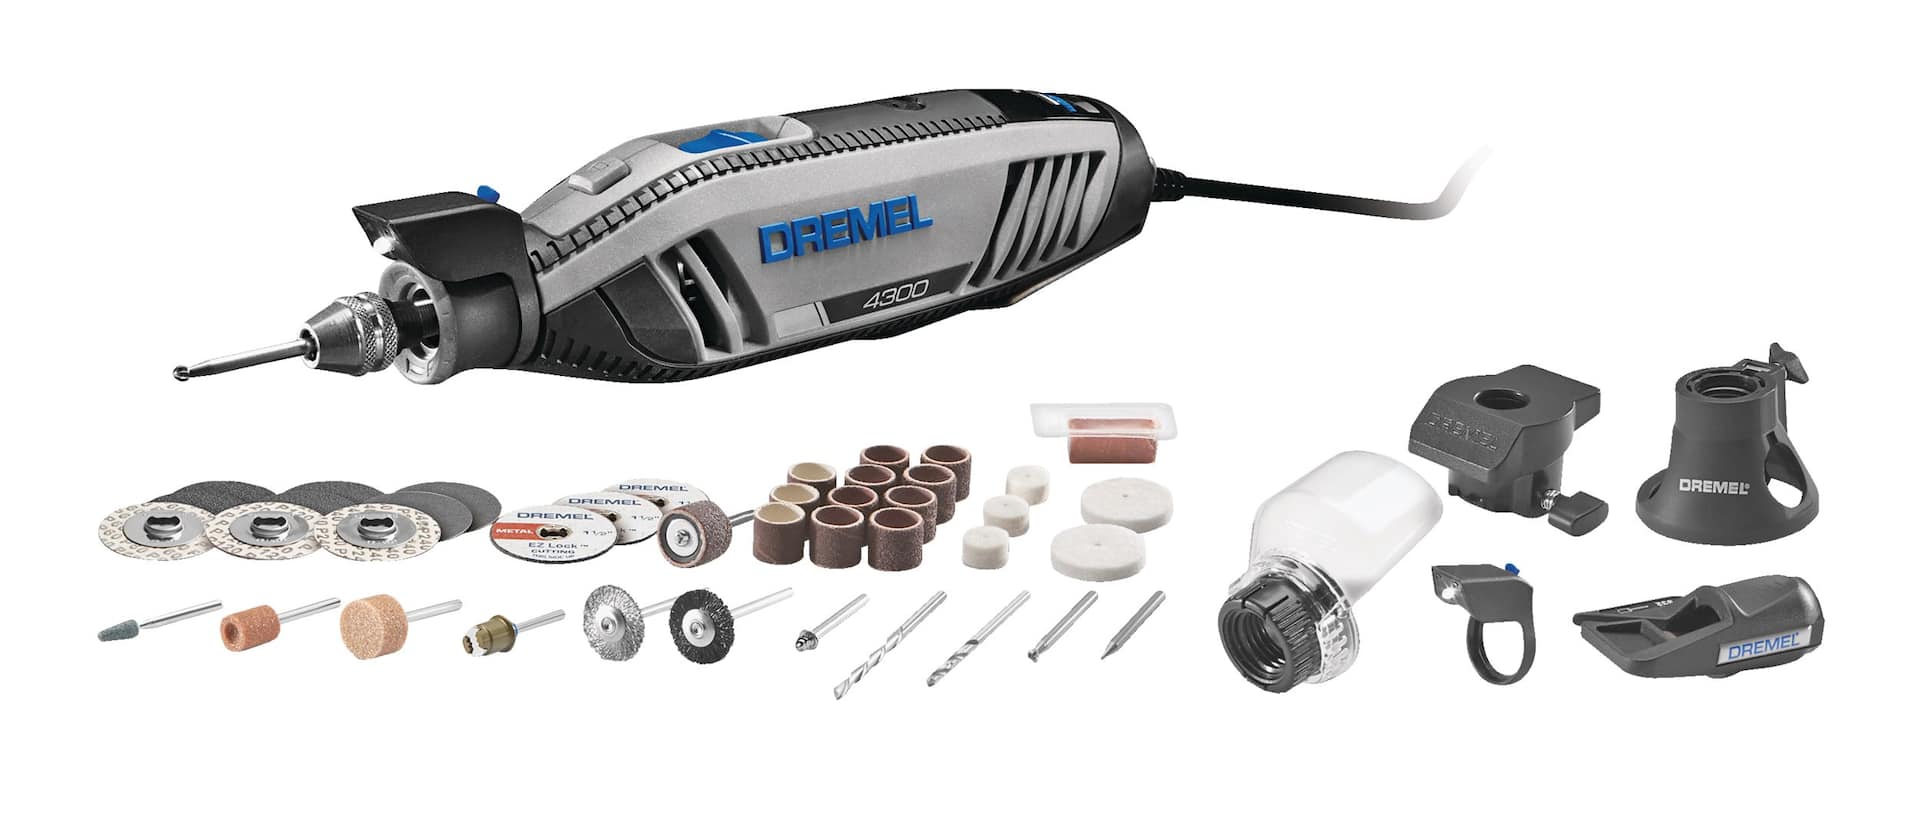 Dremel 4300-5/40 1.6A Variable Speed Rotary Tool Kit with Attachments &  Accessory Bits, 46-pc